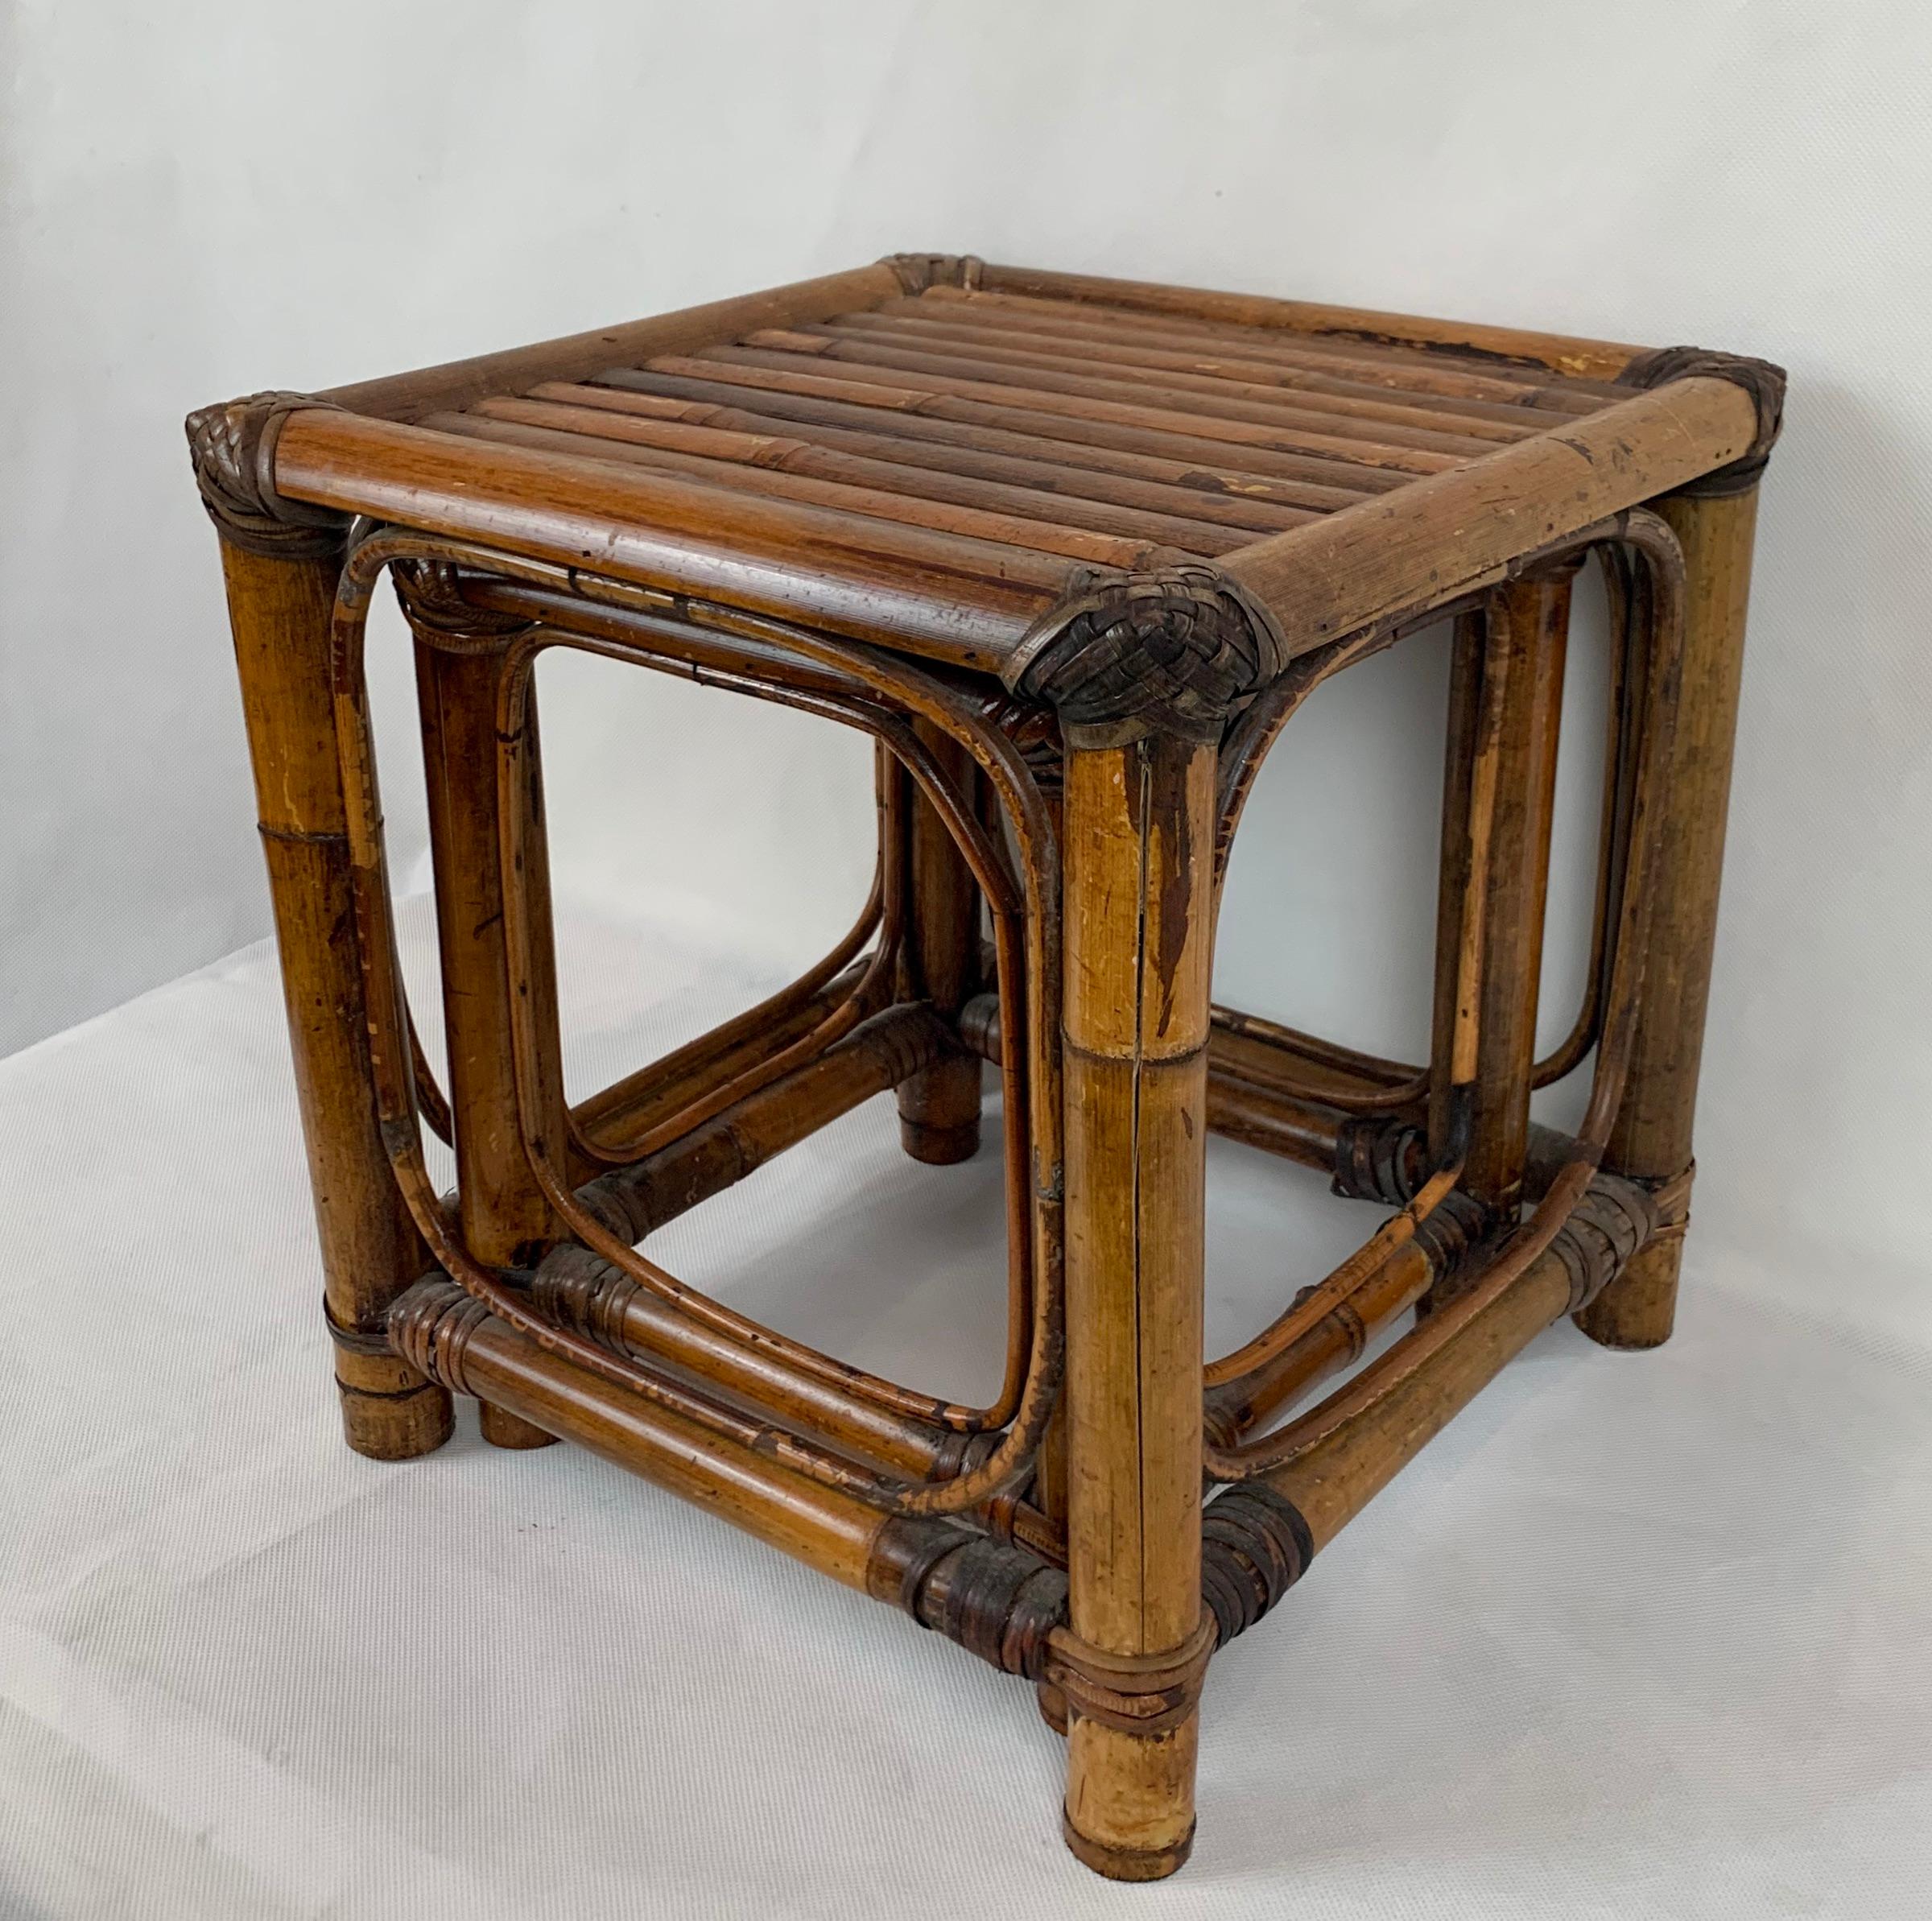 Chinoiserie Set of Two Stacking Bamboo Tables with Added Beveled Glass Tops